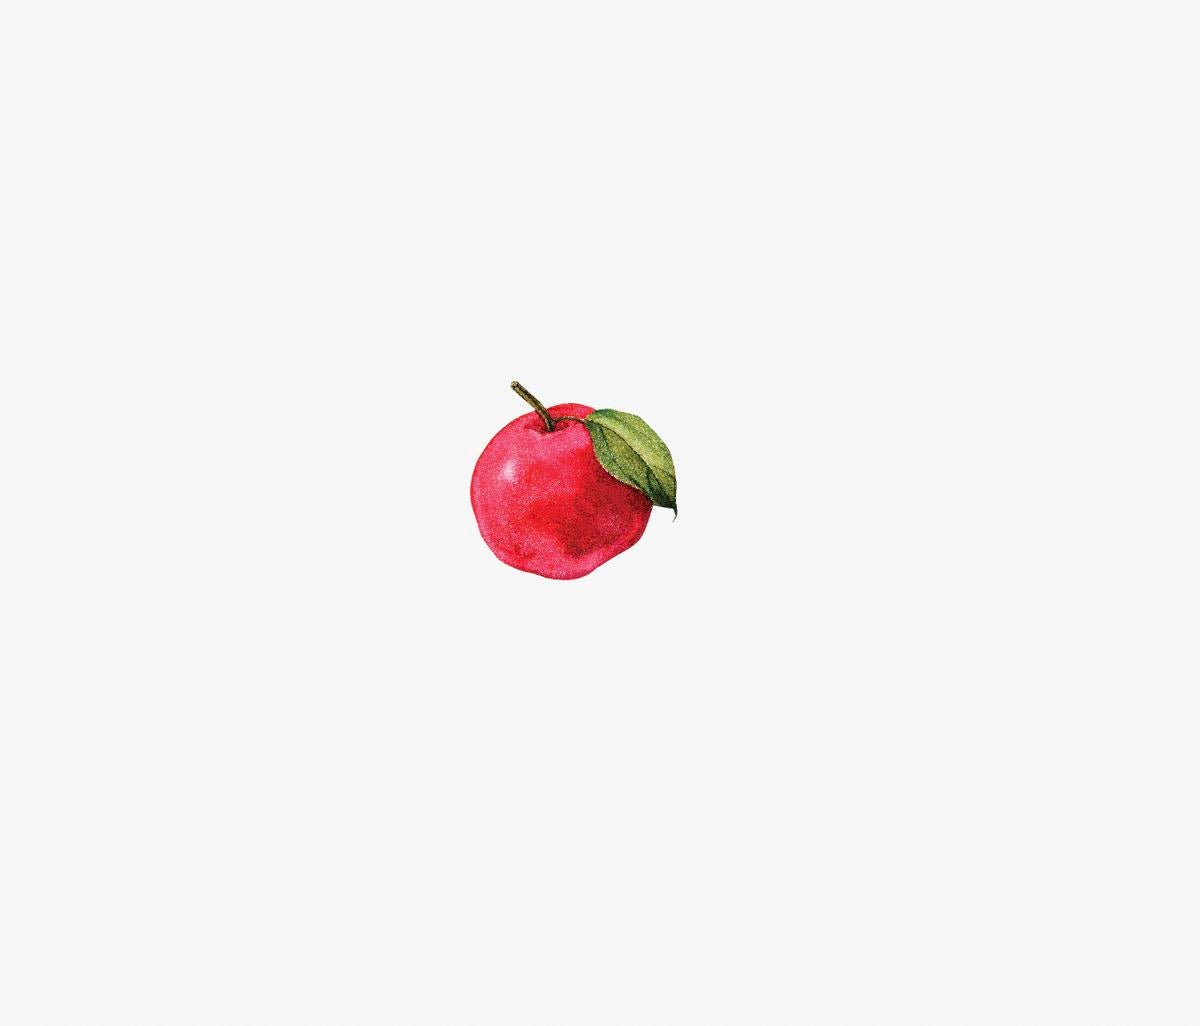 A single red apple with a green leaf, centered against a plain white background, adorned with Cover-Alls Thanksgiving Cornucopia Decals.